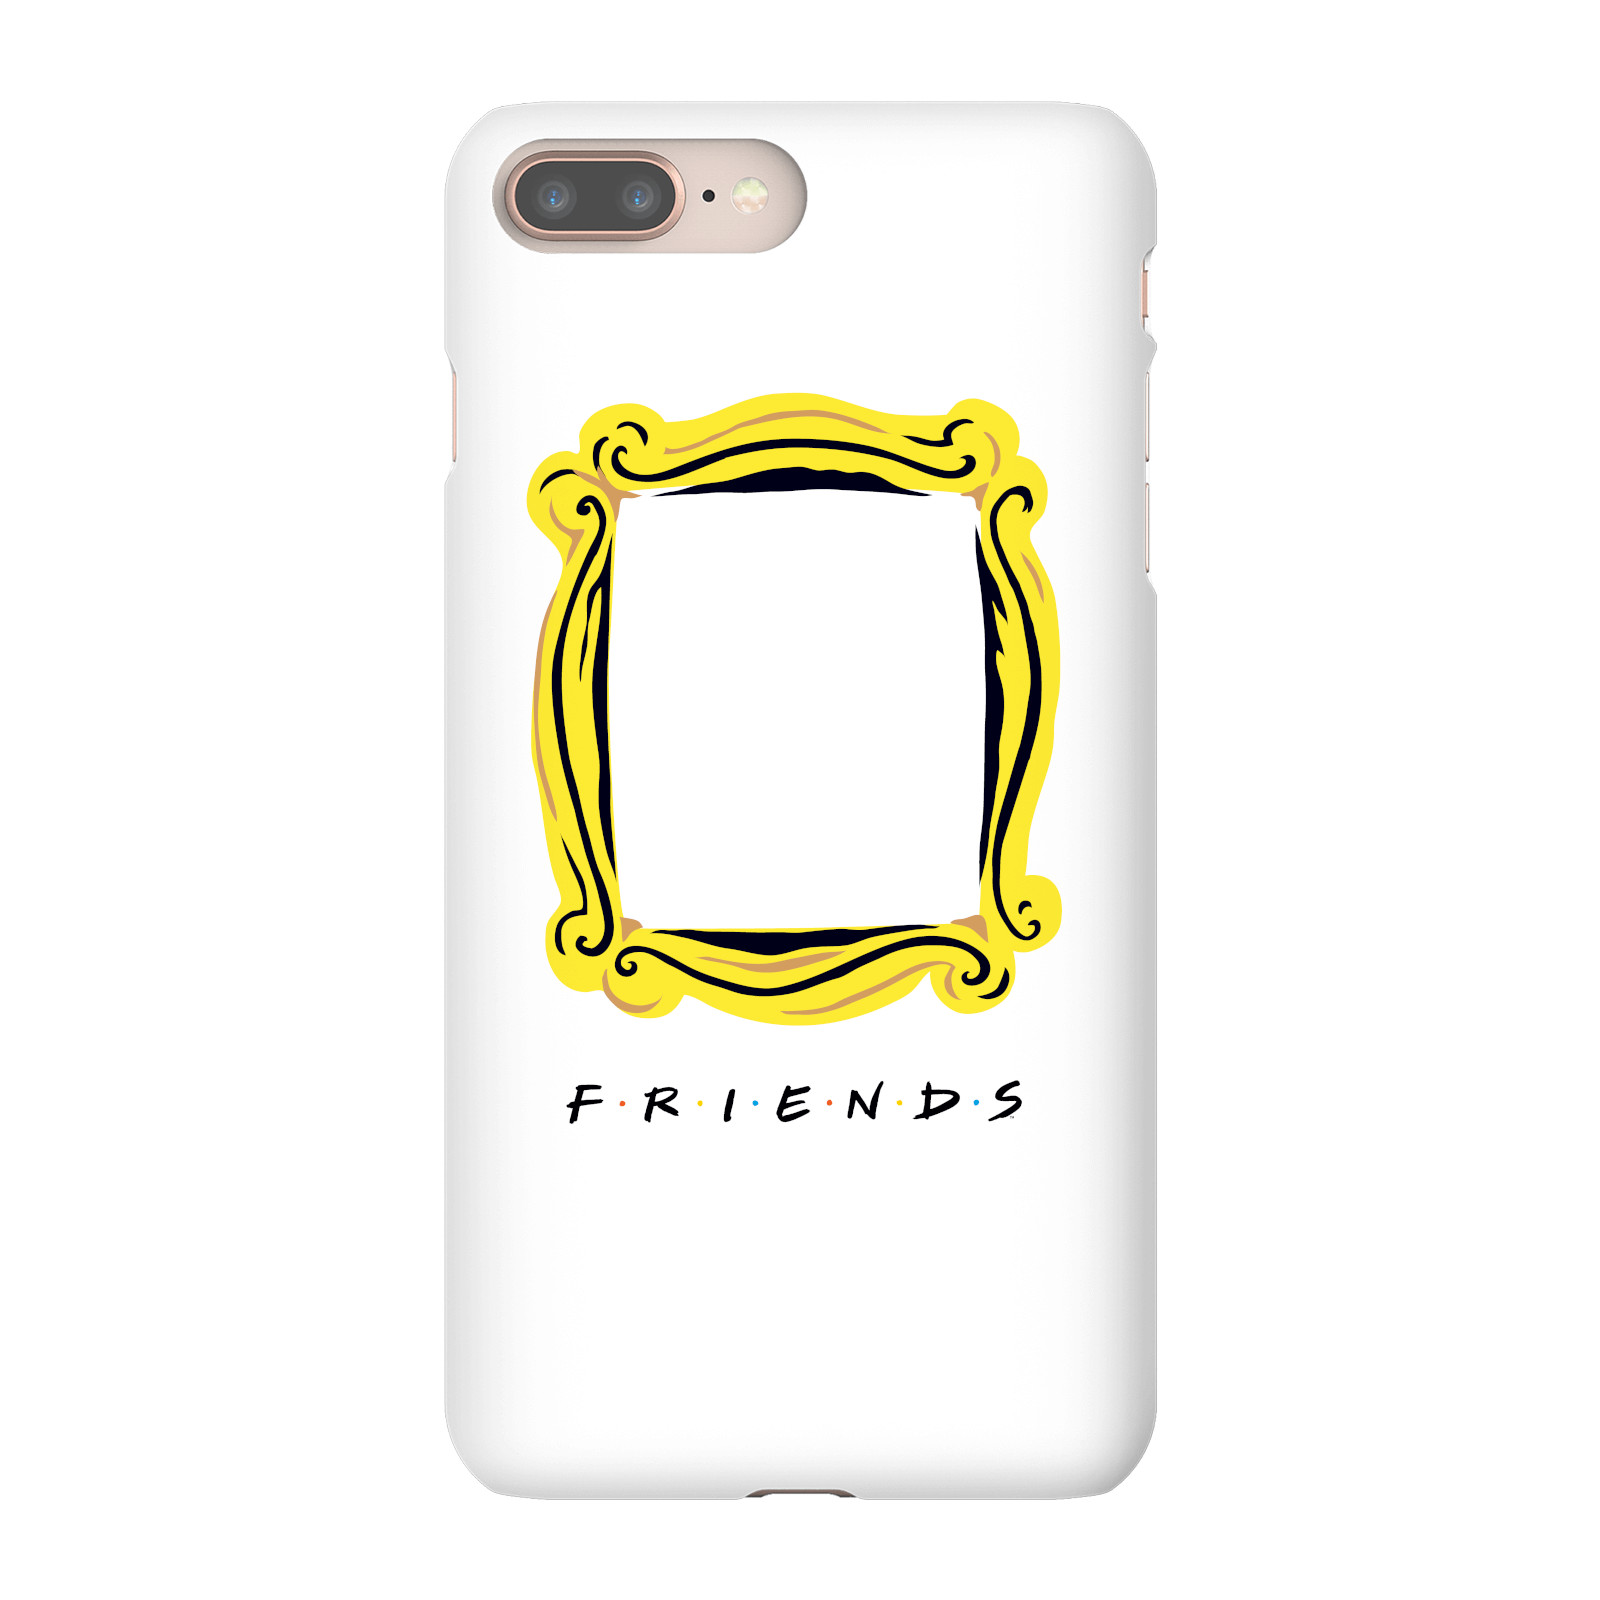 Photos - Case Frame Friends  Phone  for iPhone and Android - iPhone 7 - Snap  - G 